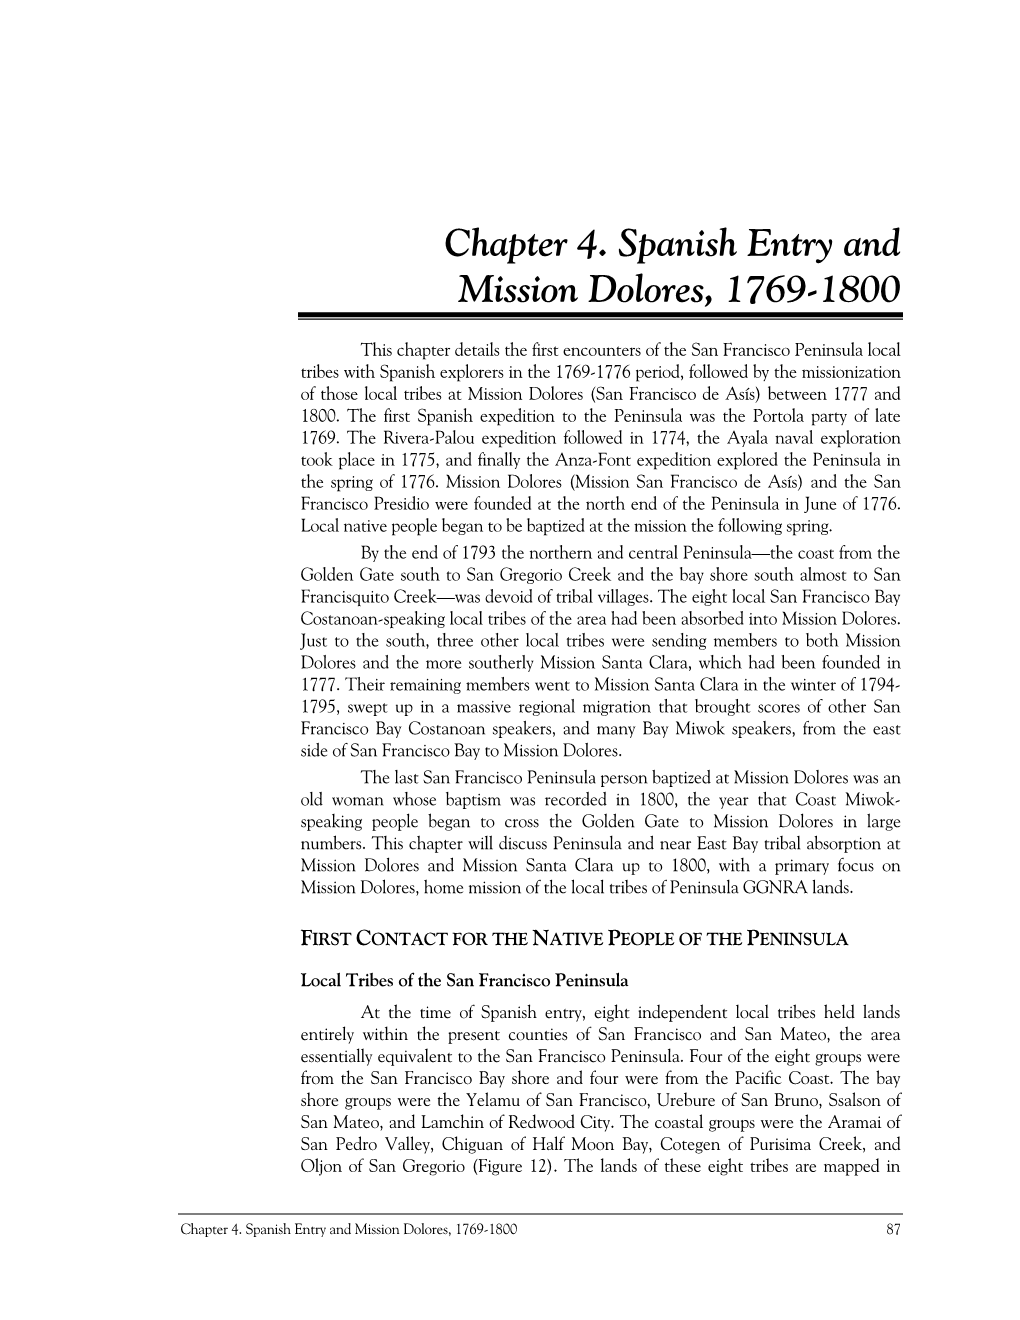 Chapter 4. Spanish Entry and Mission Dolores, 1769-1800